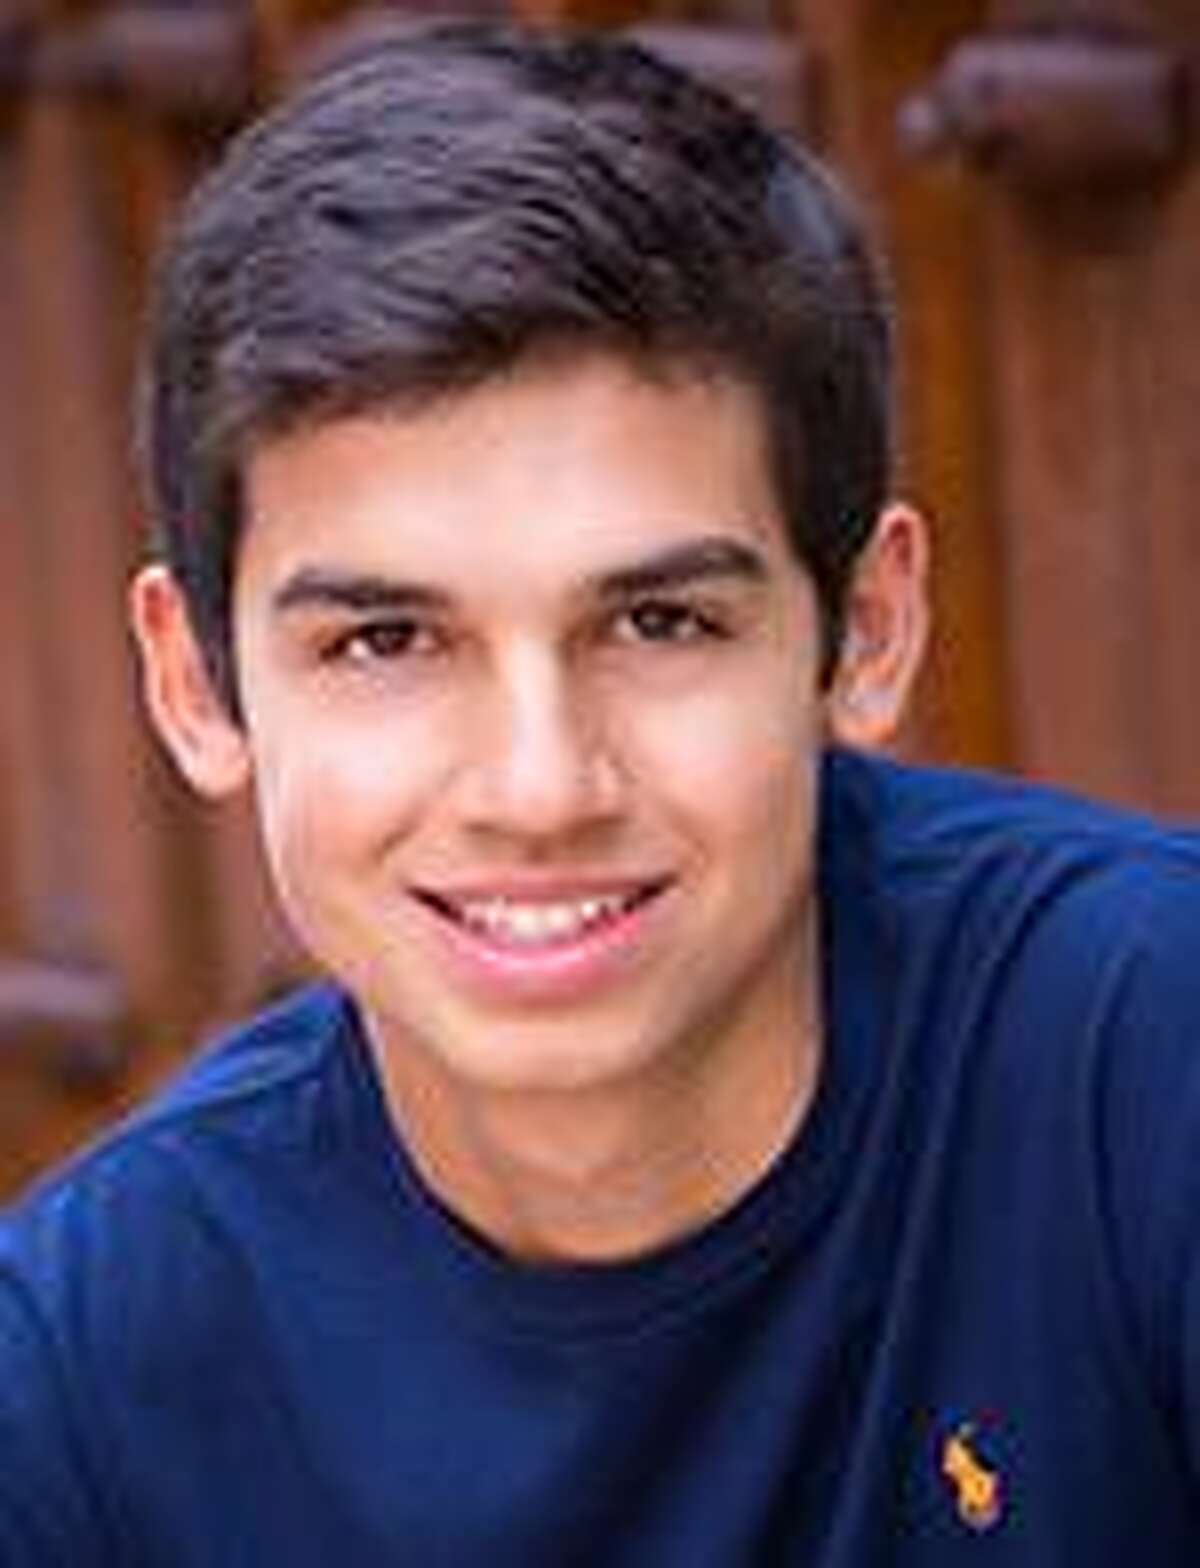 Marc Portell Elizondo, a talented tennis player who earned a 4.0 grade point average during his first semester at A&M University, died Jan. 11 after a car accident at 19.